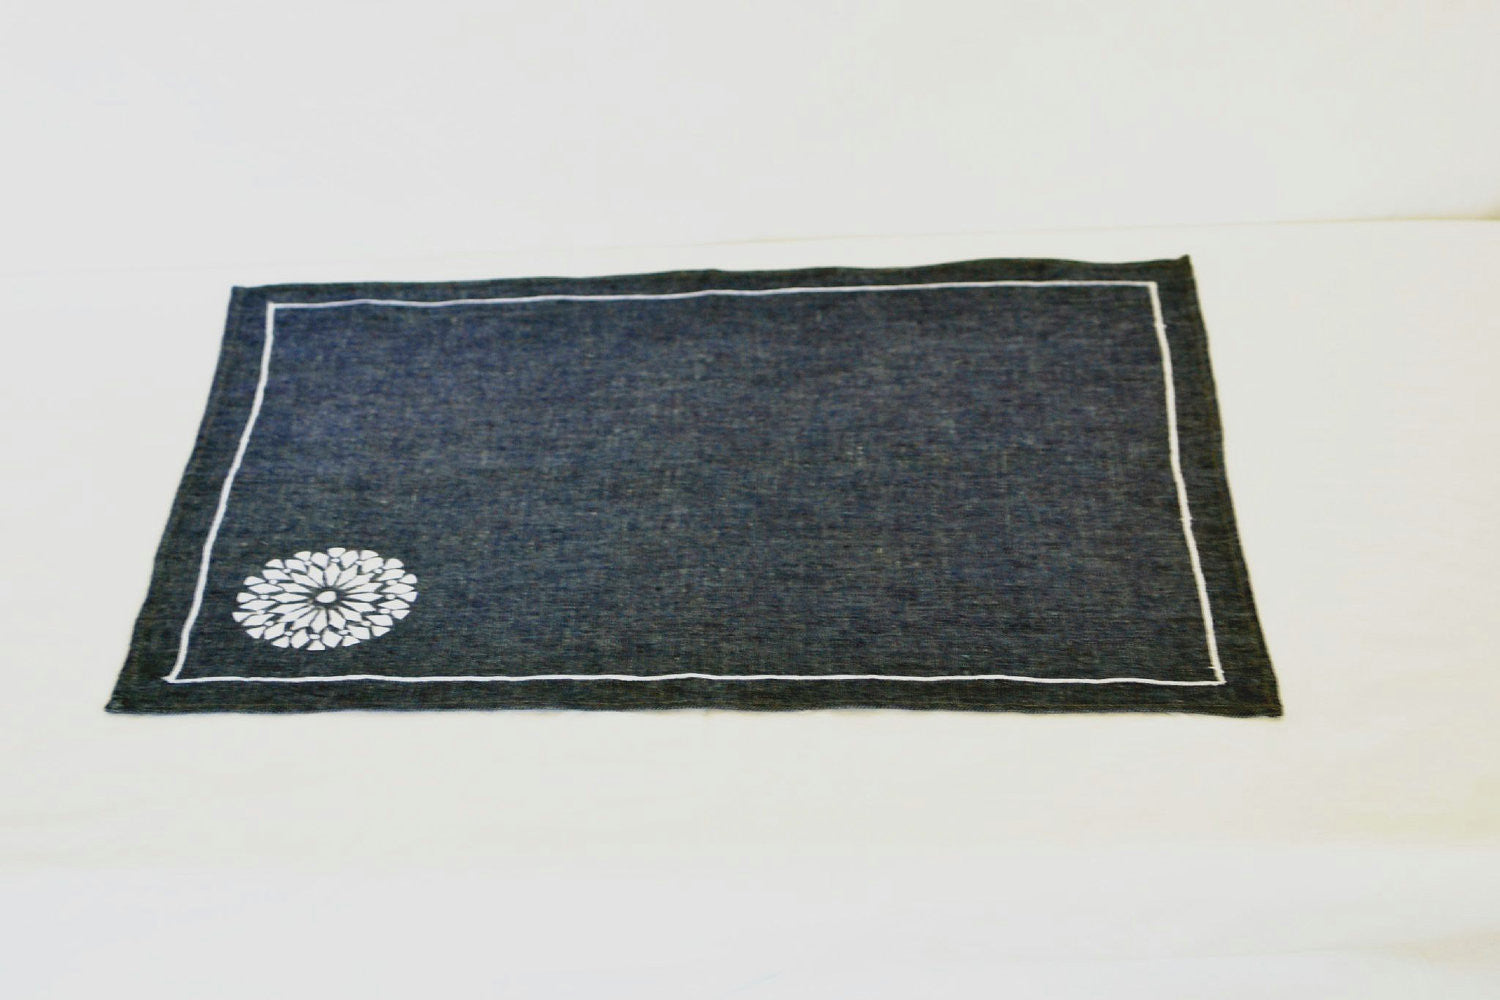 Embroidered place mats in navy blue and white